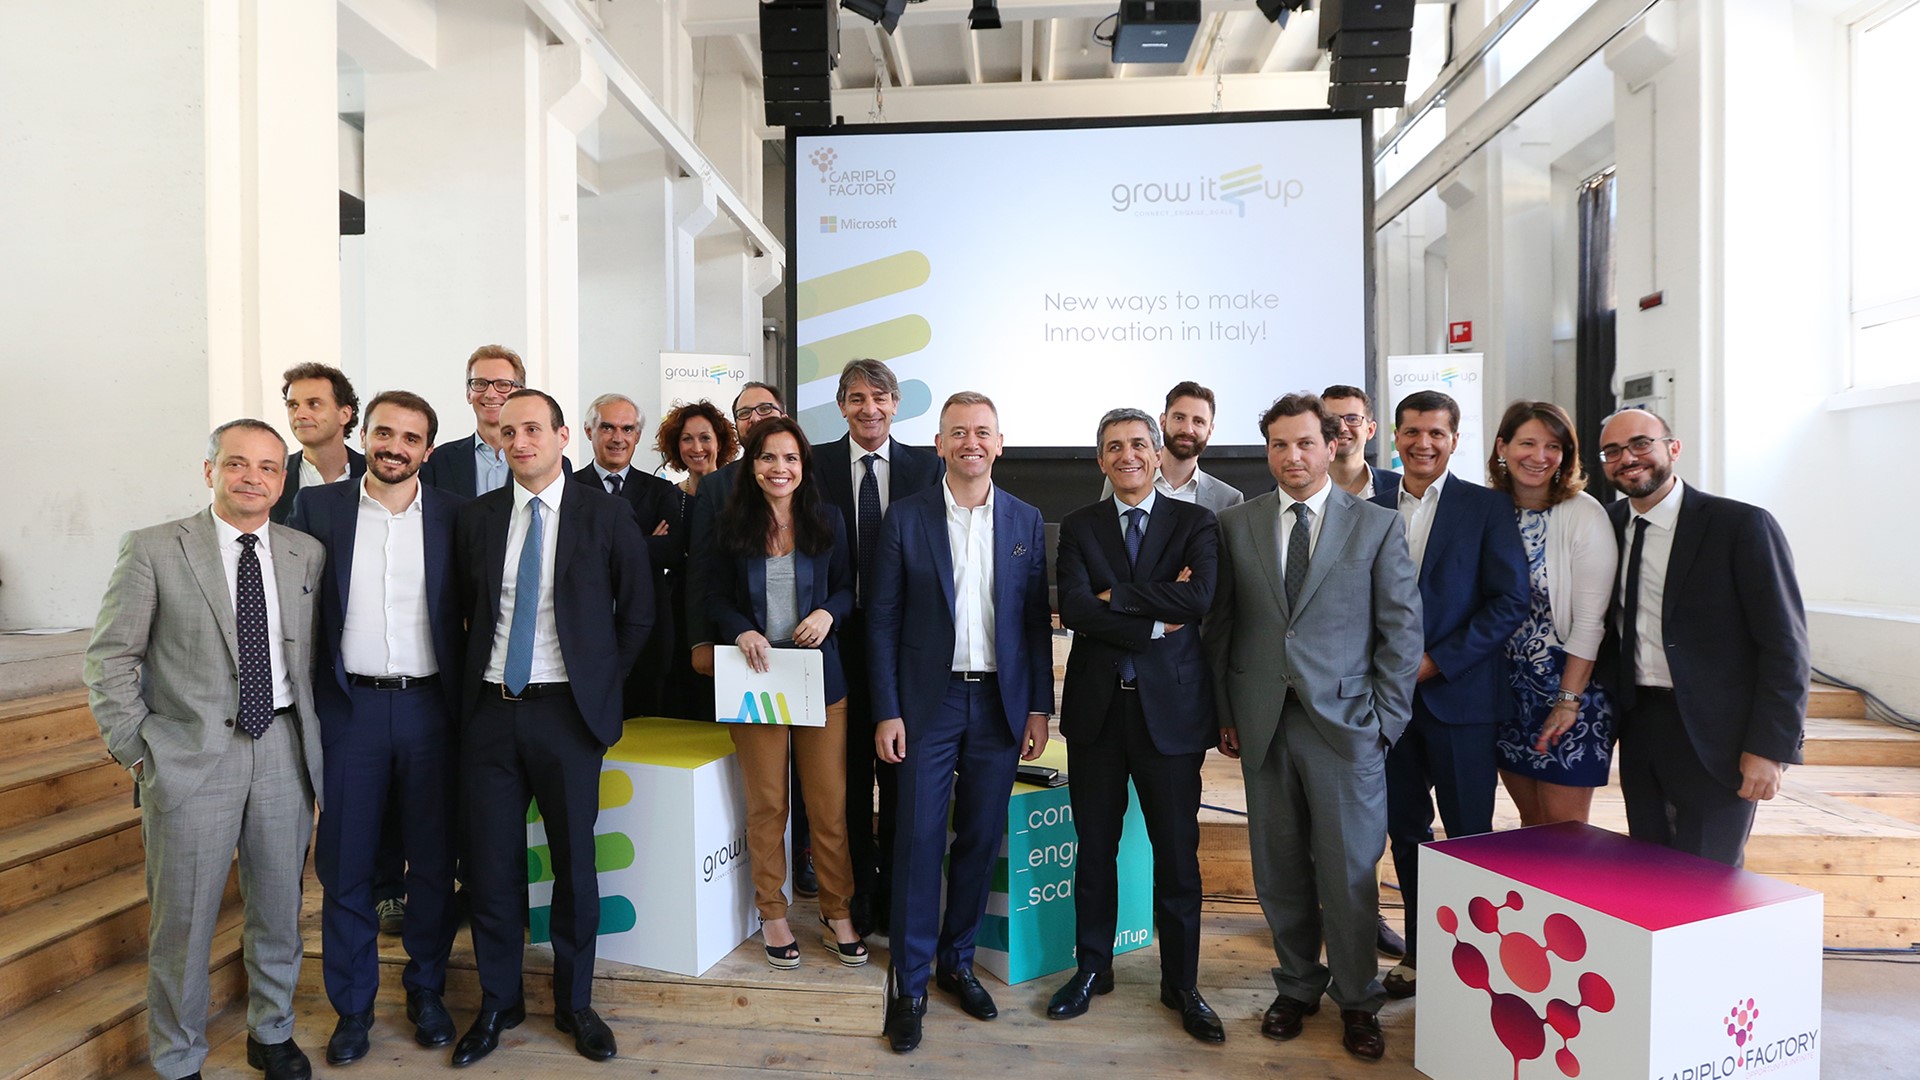 New Holland Agriculture partners with “grow it up” by Microsoft, the new way of doing innovation in Italy